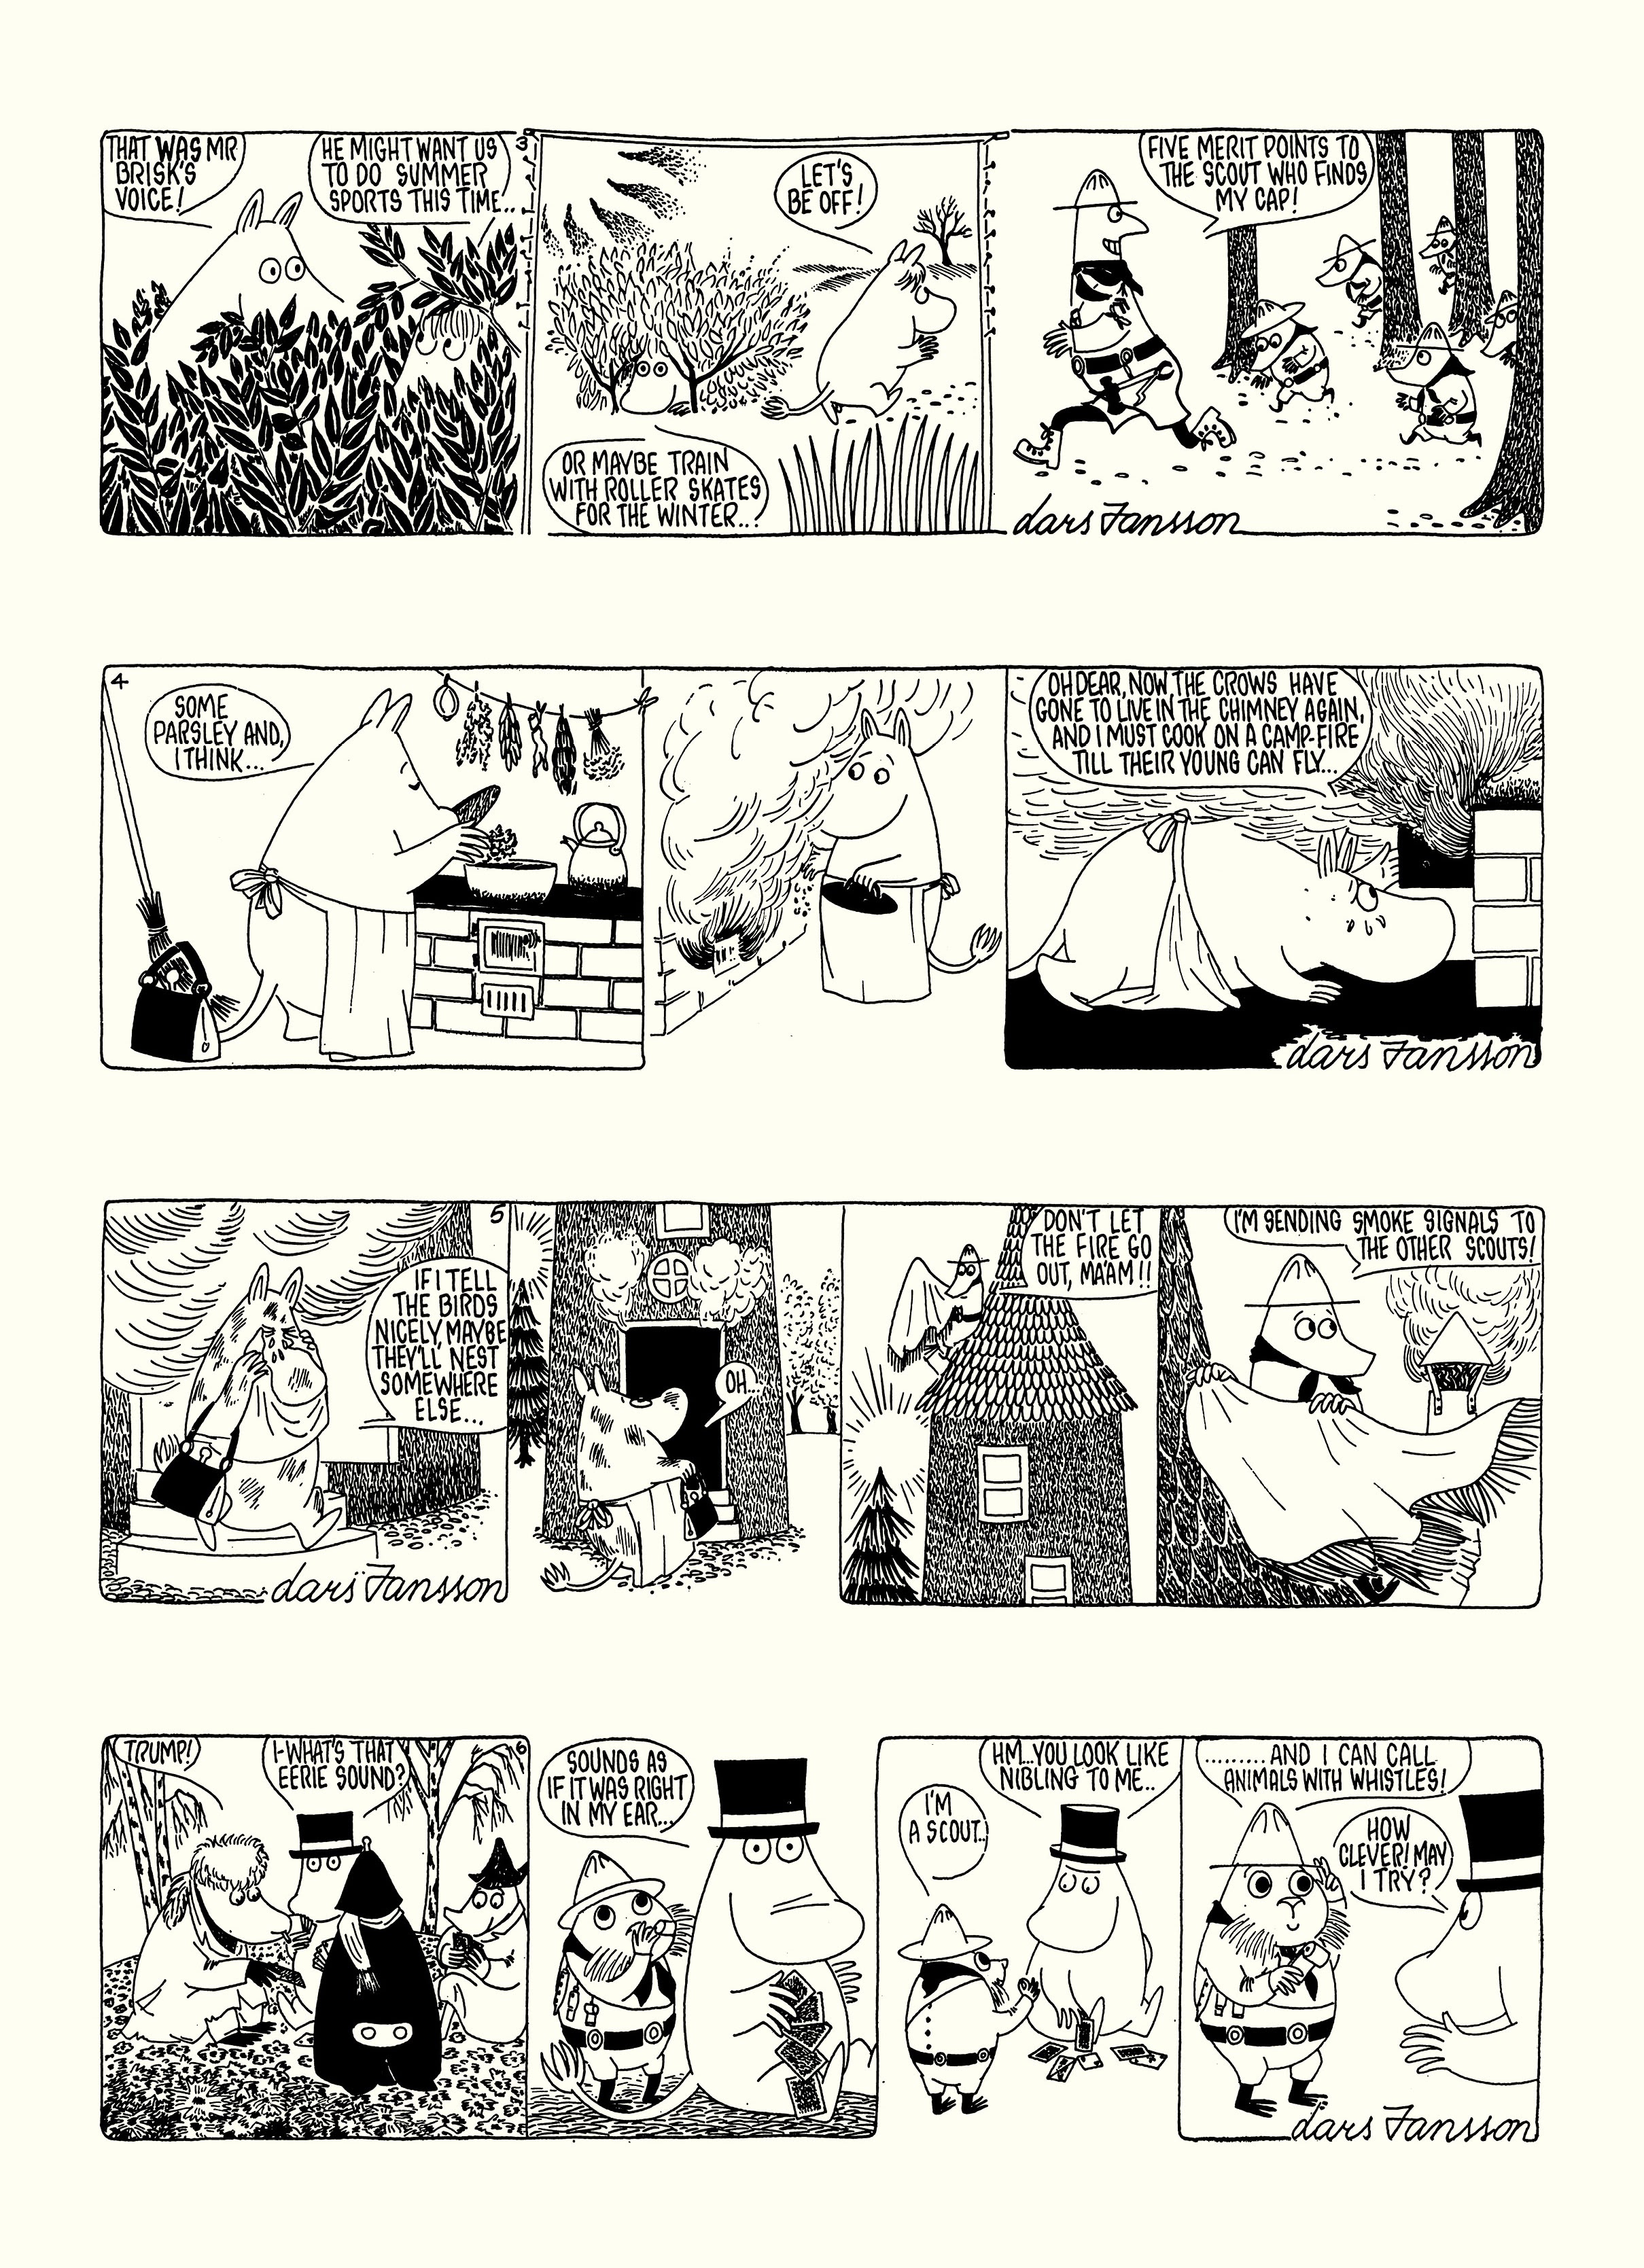 Read online Moomin: The Complete Lars Jansson Comic Strip comic -  Issue # TPB 7 - 28